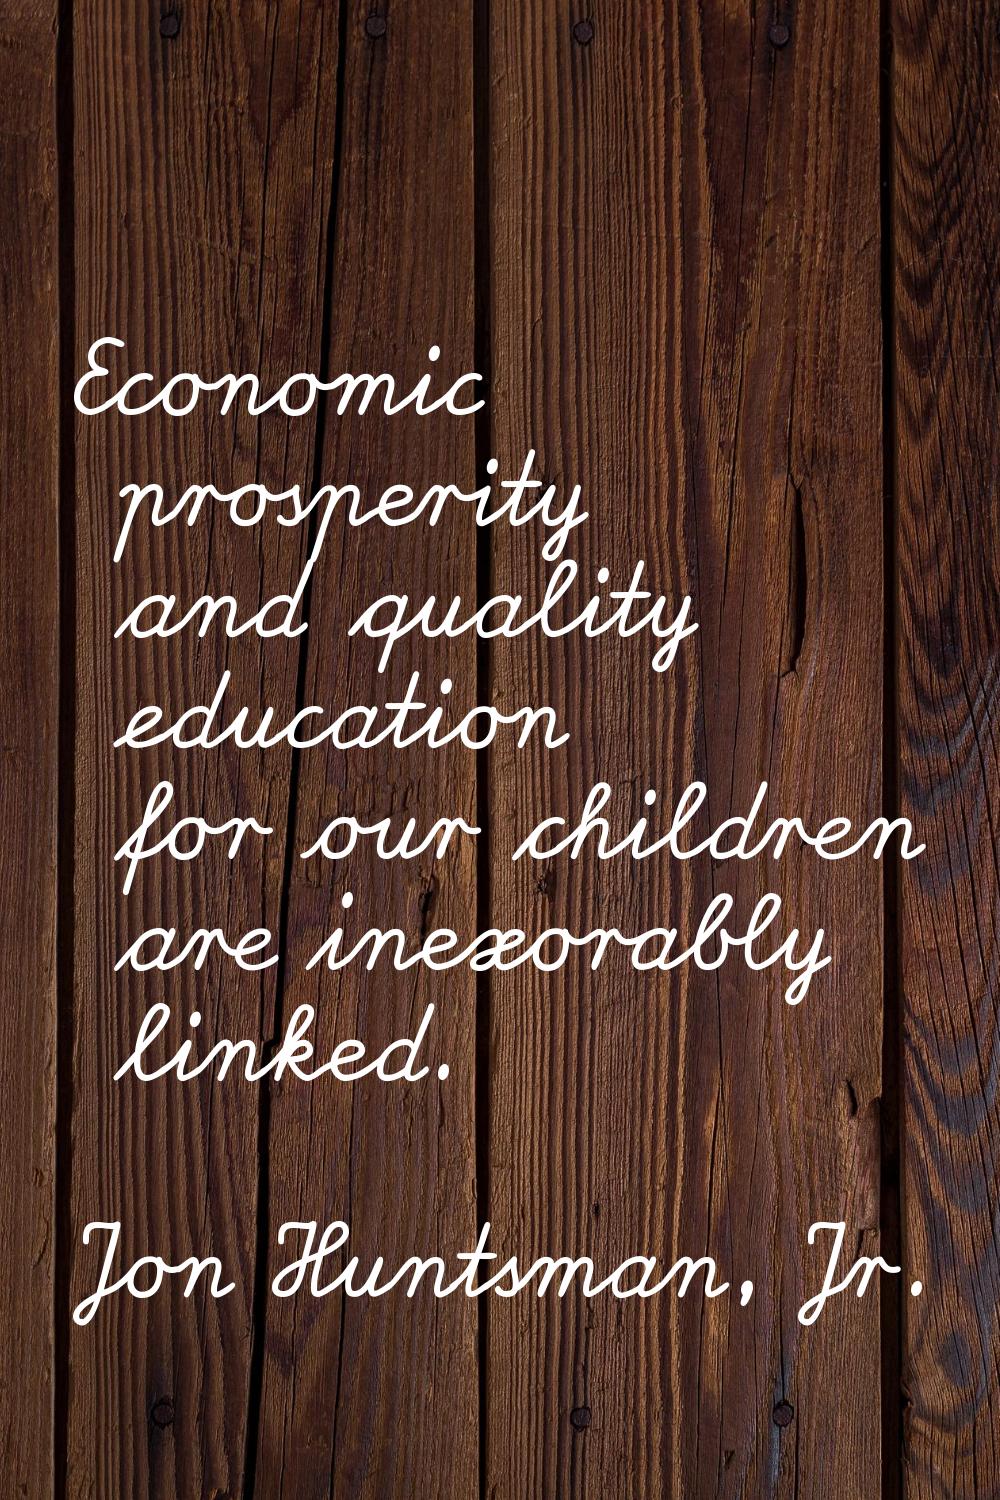 Economic prosperity and quality education for our children are inexorably linked.